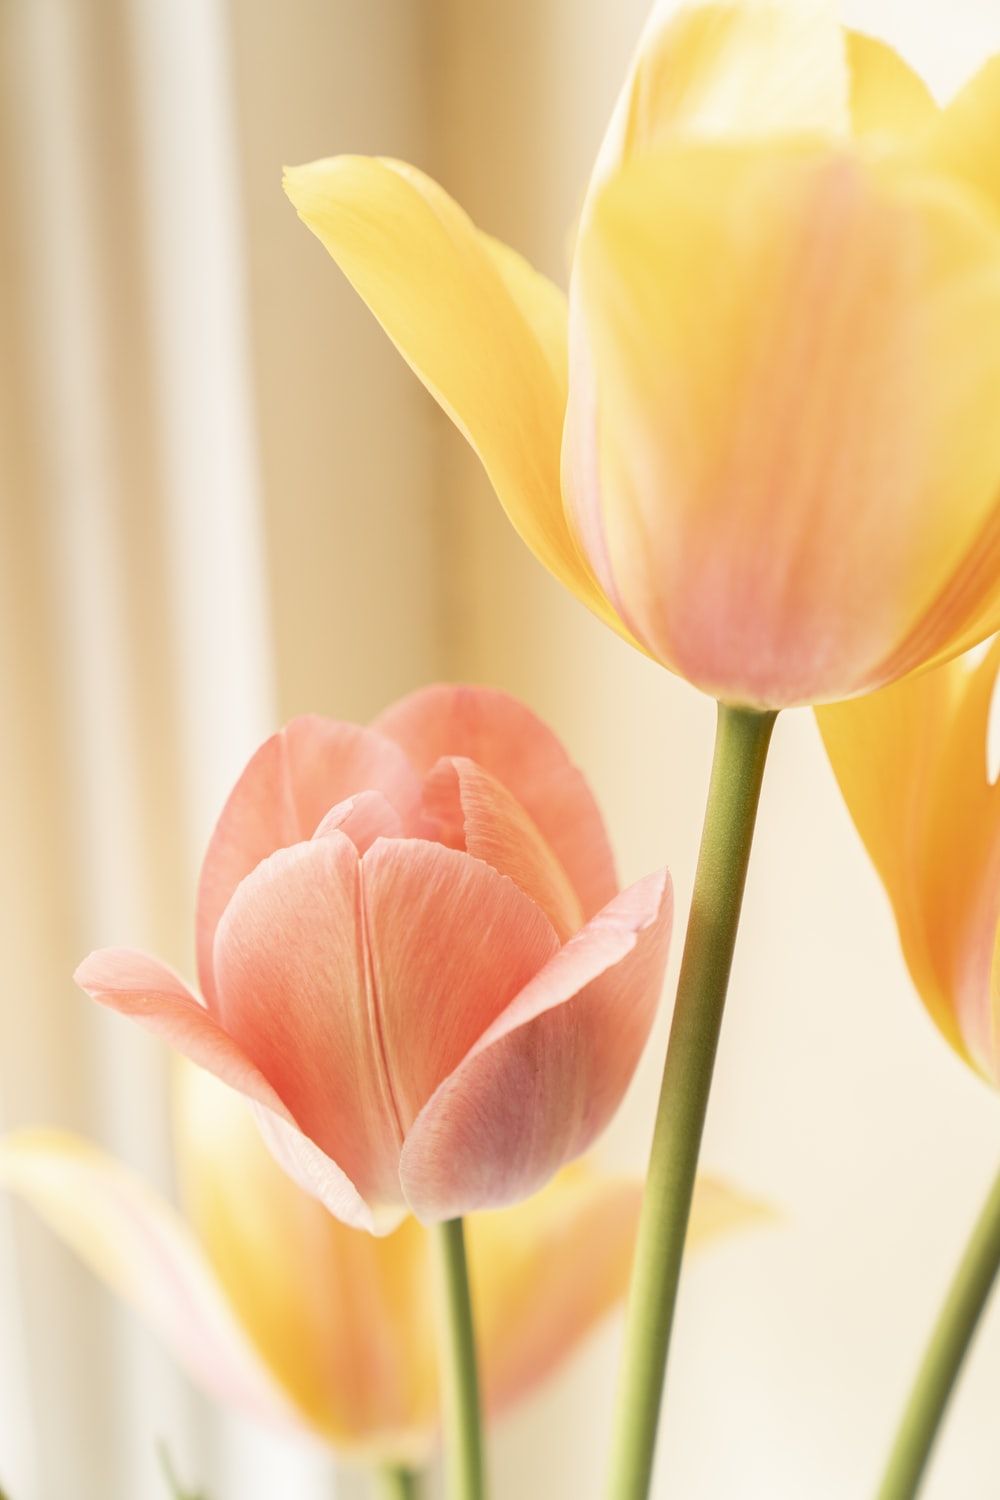 A vase of yellow and pink tulips sits on a table. - Tulip